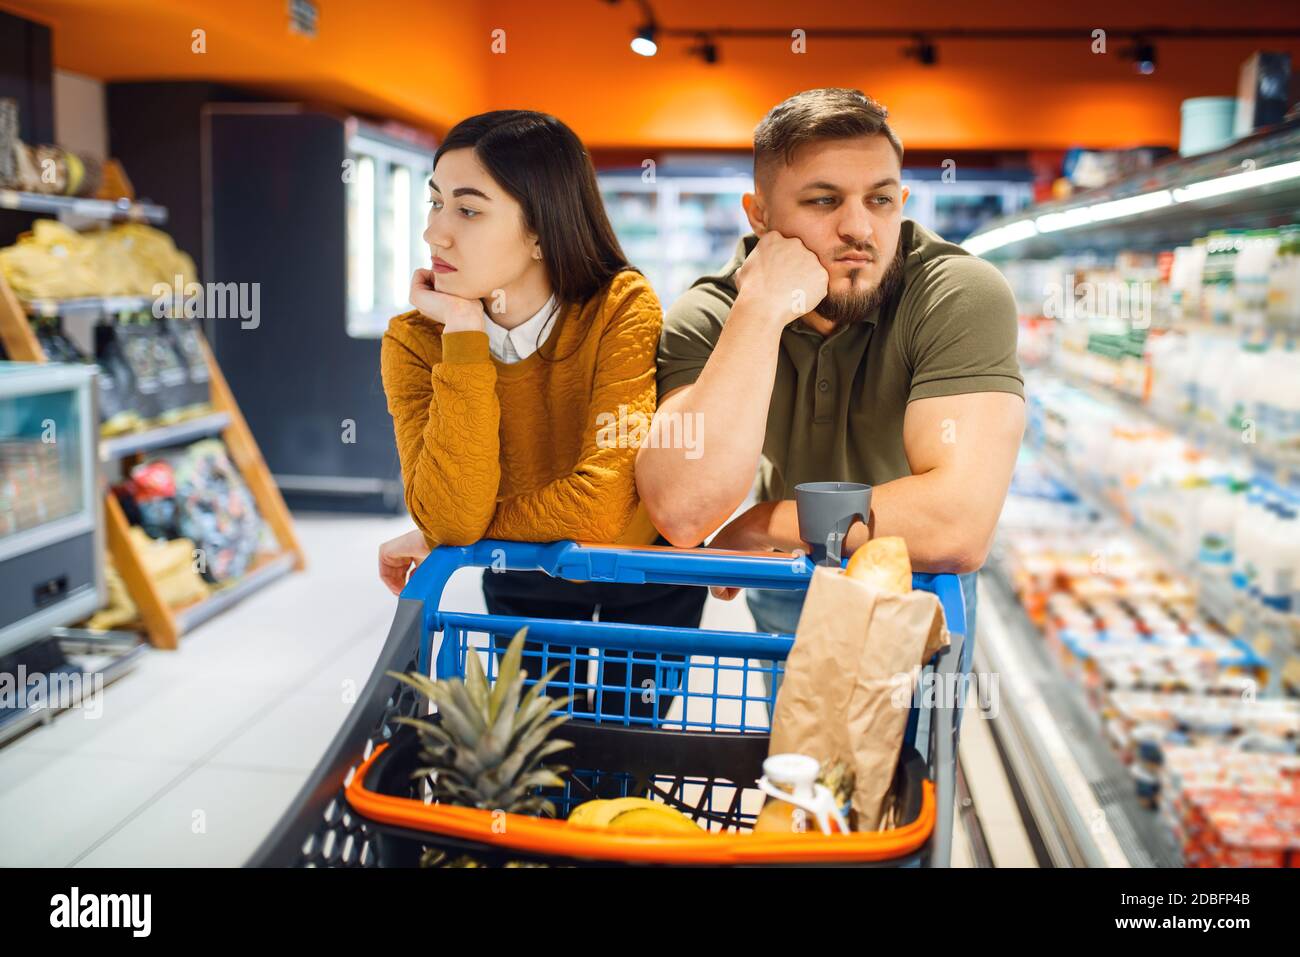 https://c8.alamy.com/comp/2DBFP4B/bored-family-couple-in-grocery-store-man-and-woman-with-cart-buying-beverages-and-products-in-market-two-customers-shopping-food-and-drinks-2DBFP4B.jpg